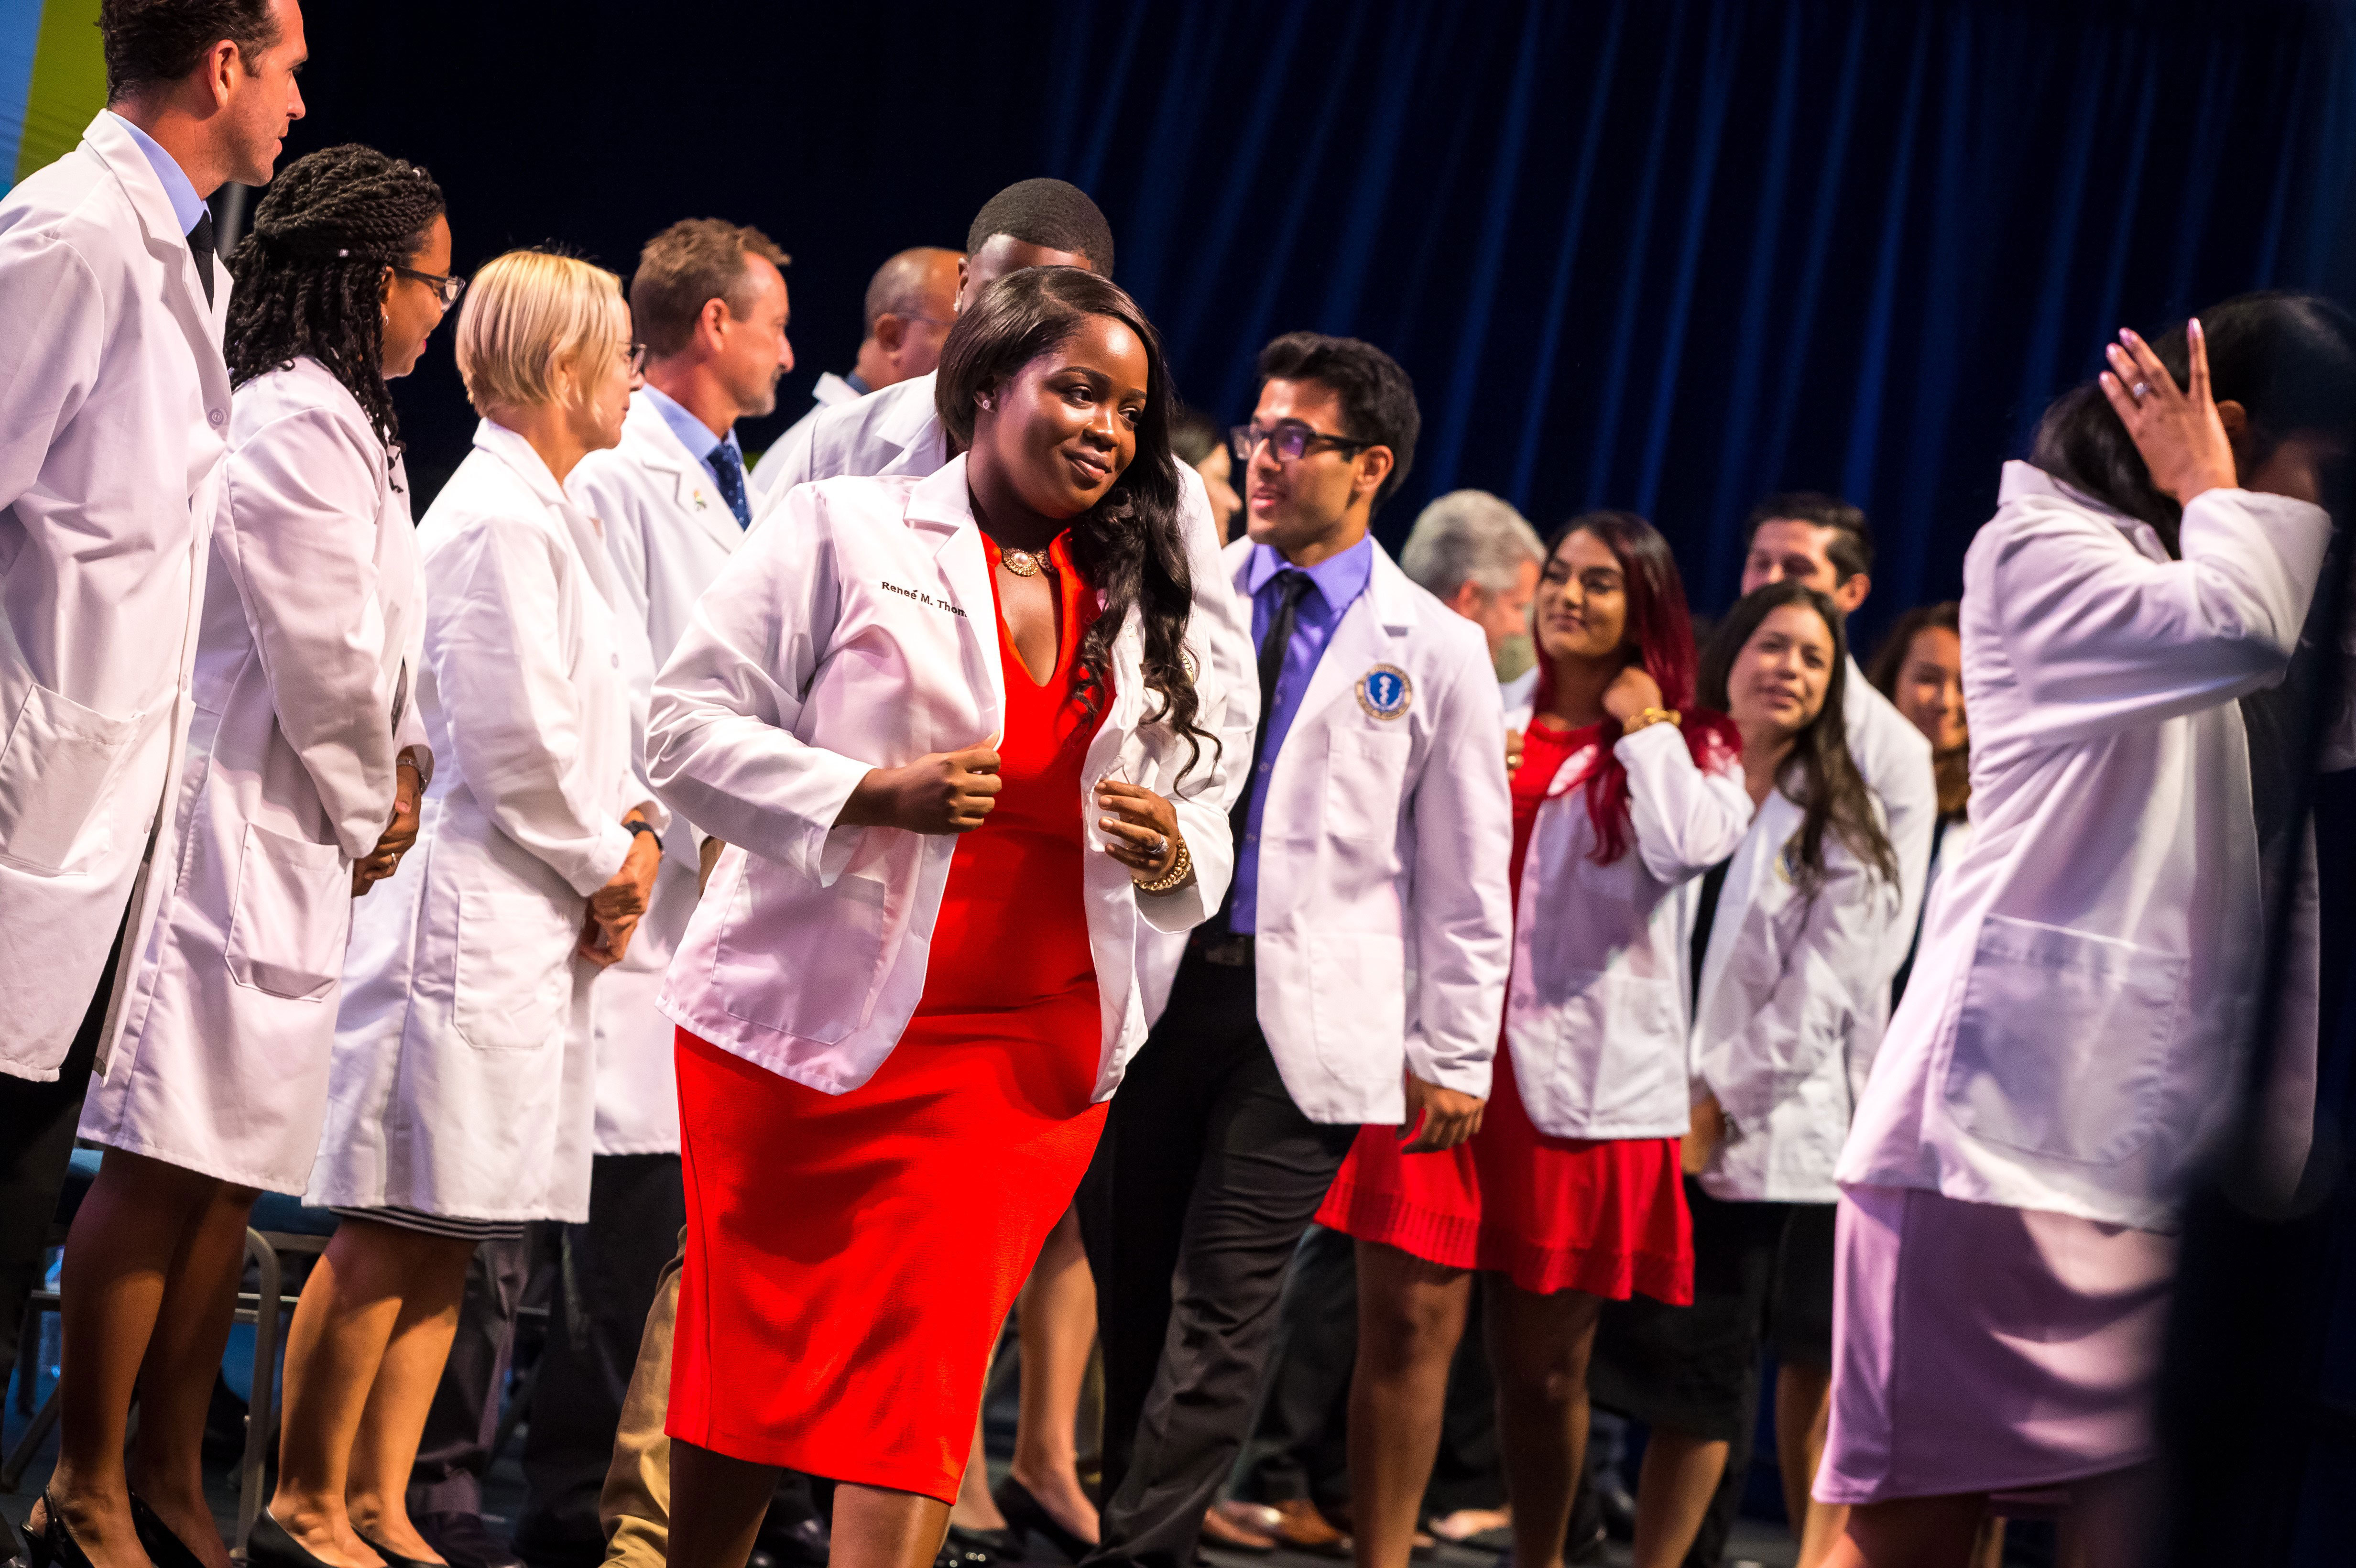 ADDING MULTIMEDIA Ross University School of Medicine Welcomes New Class  with White Coat Ceremony | Business Wire